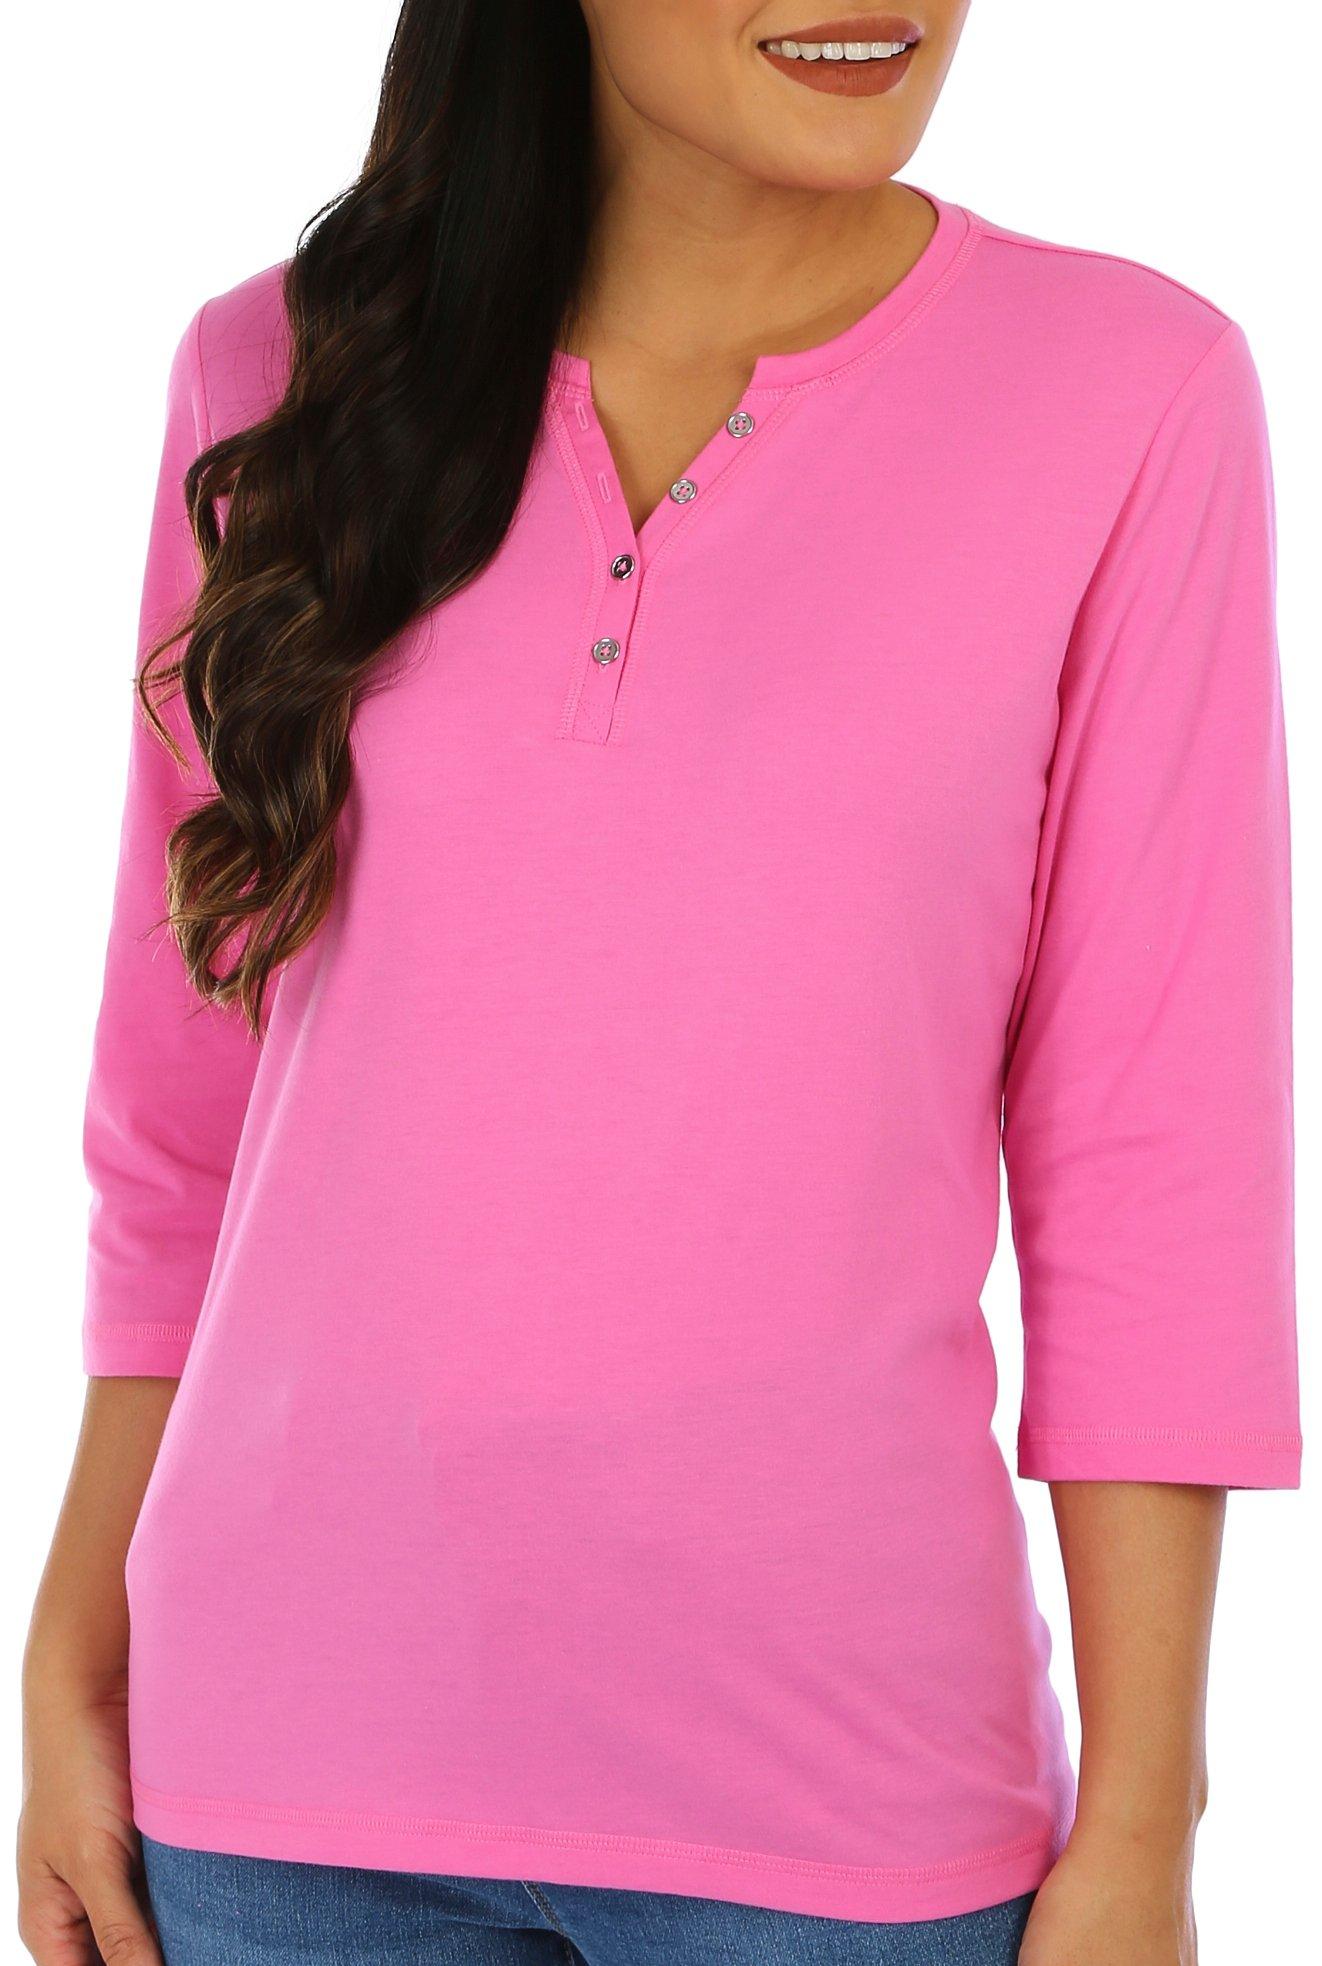 Coral Bay Petite 3/4 Sleeve Solid Color Henley